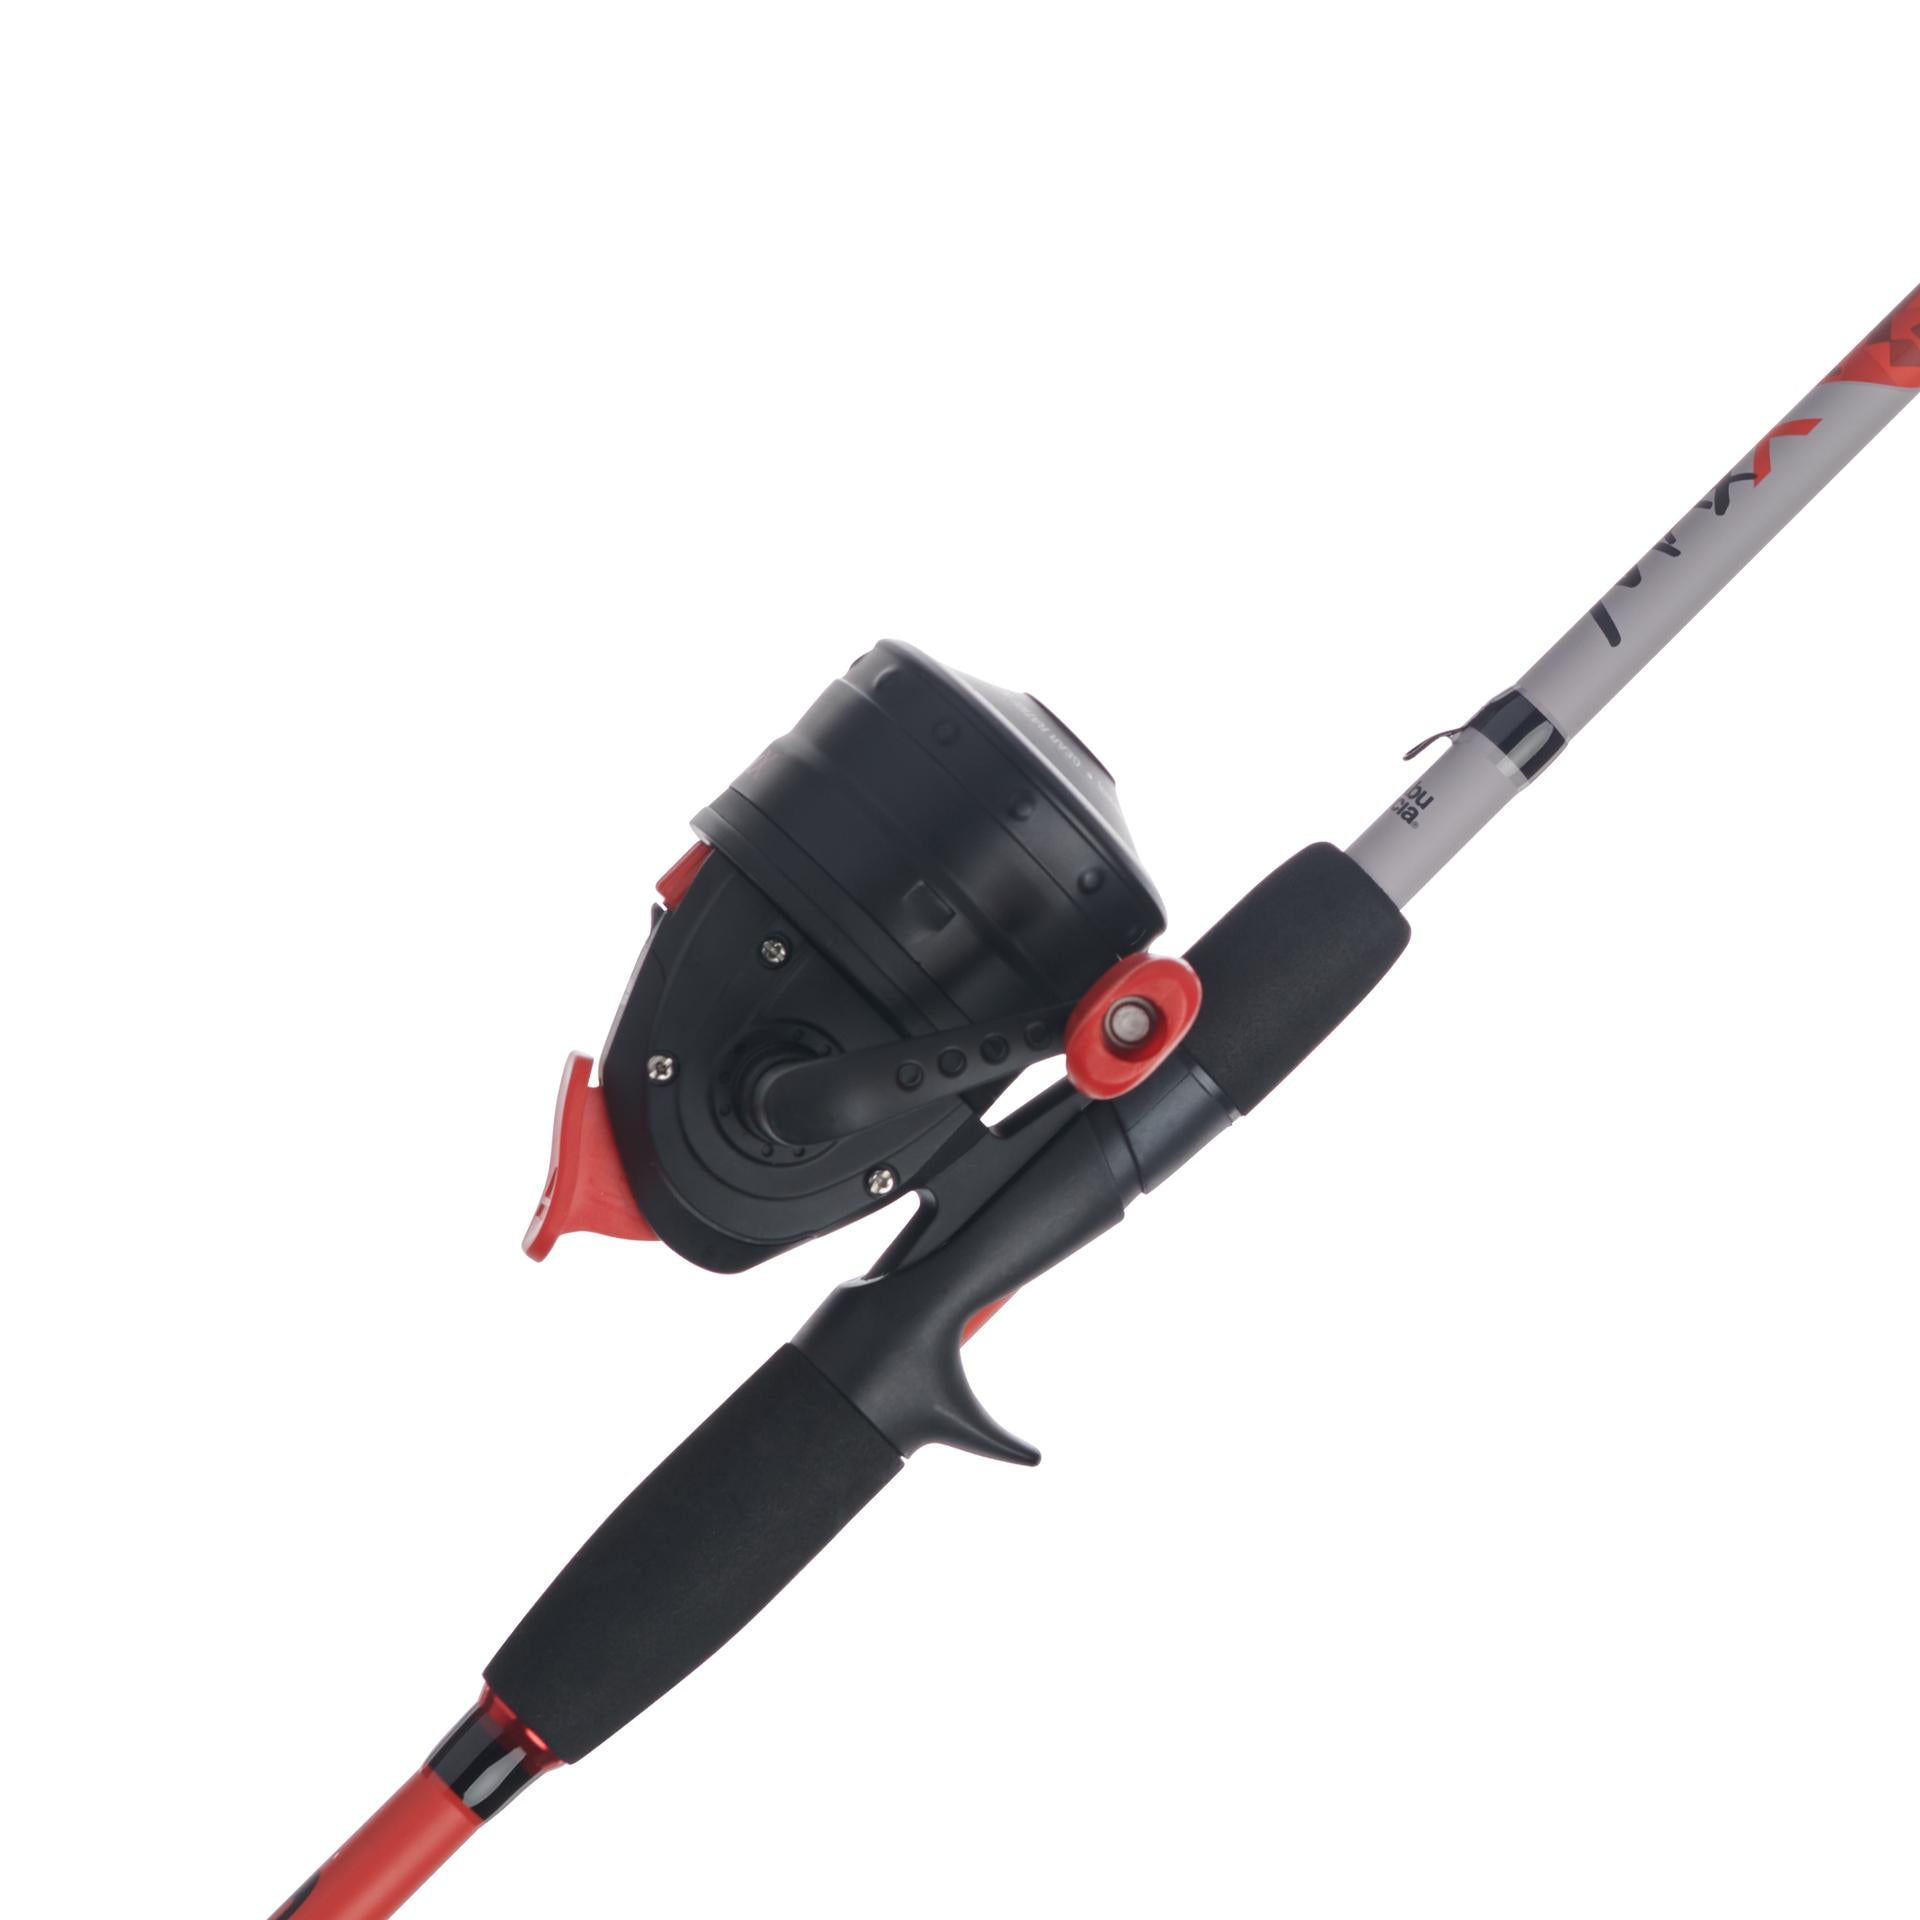 Abu Garcia 1524568 7-ft Max Z Fishing Rod and Reel Spinning Combo